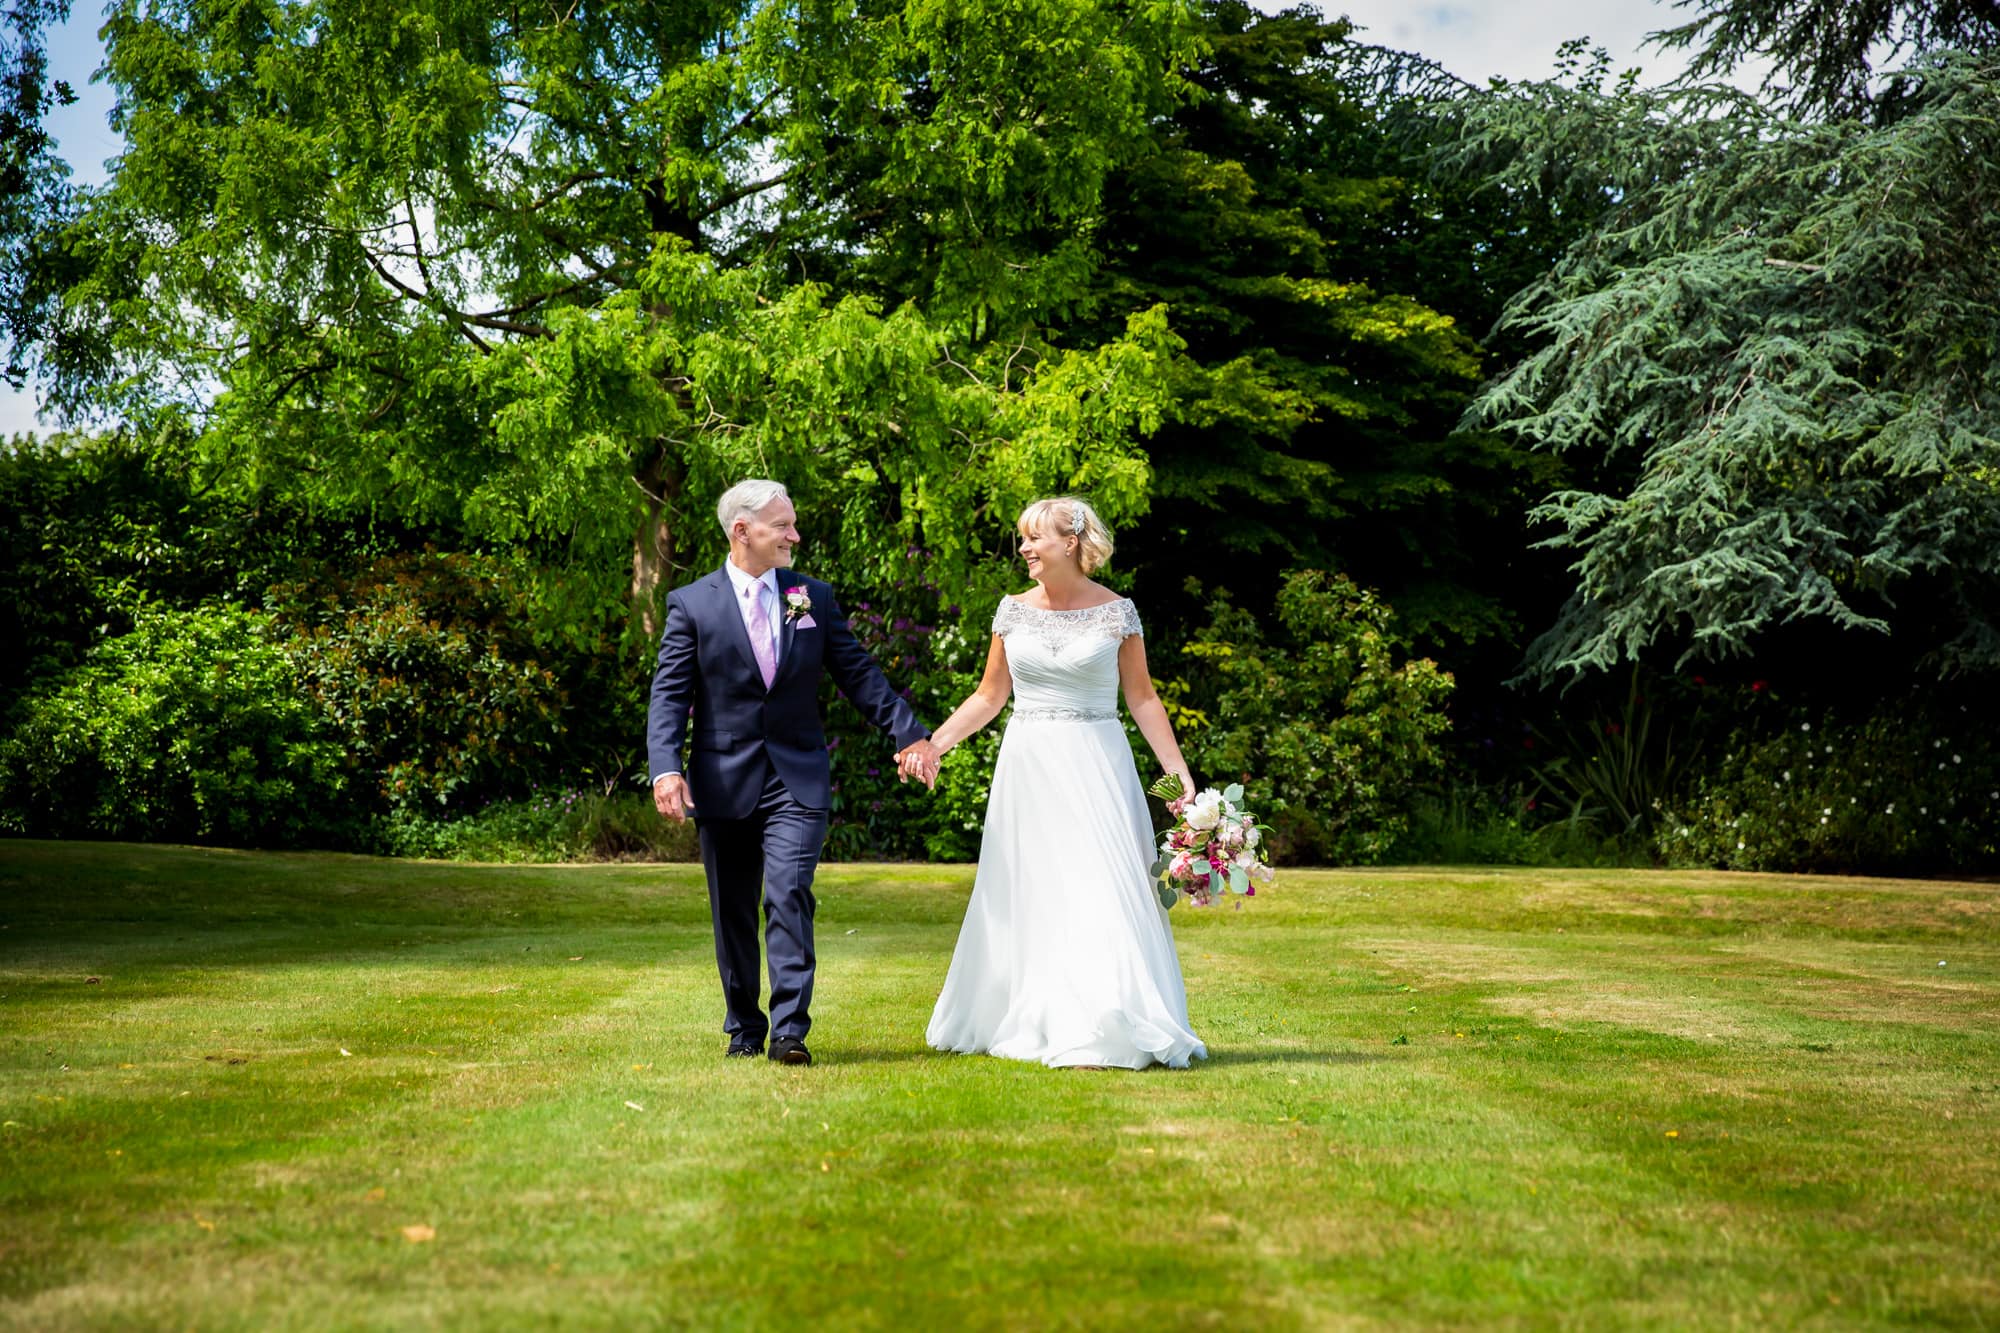 Couple holding hands and walking on grass on wedding day at Oaks Farm Weddings venue taken by Beckenham Wedding Photographer